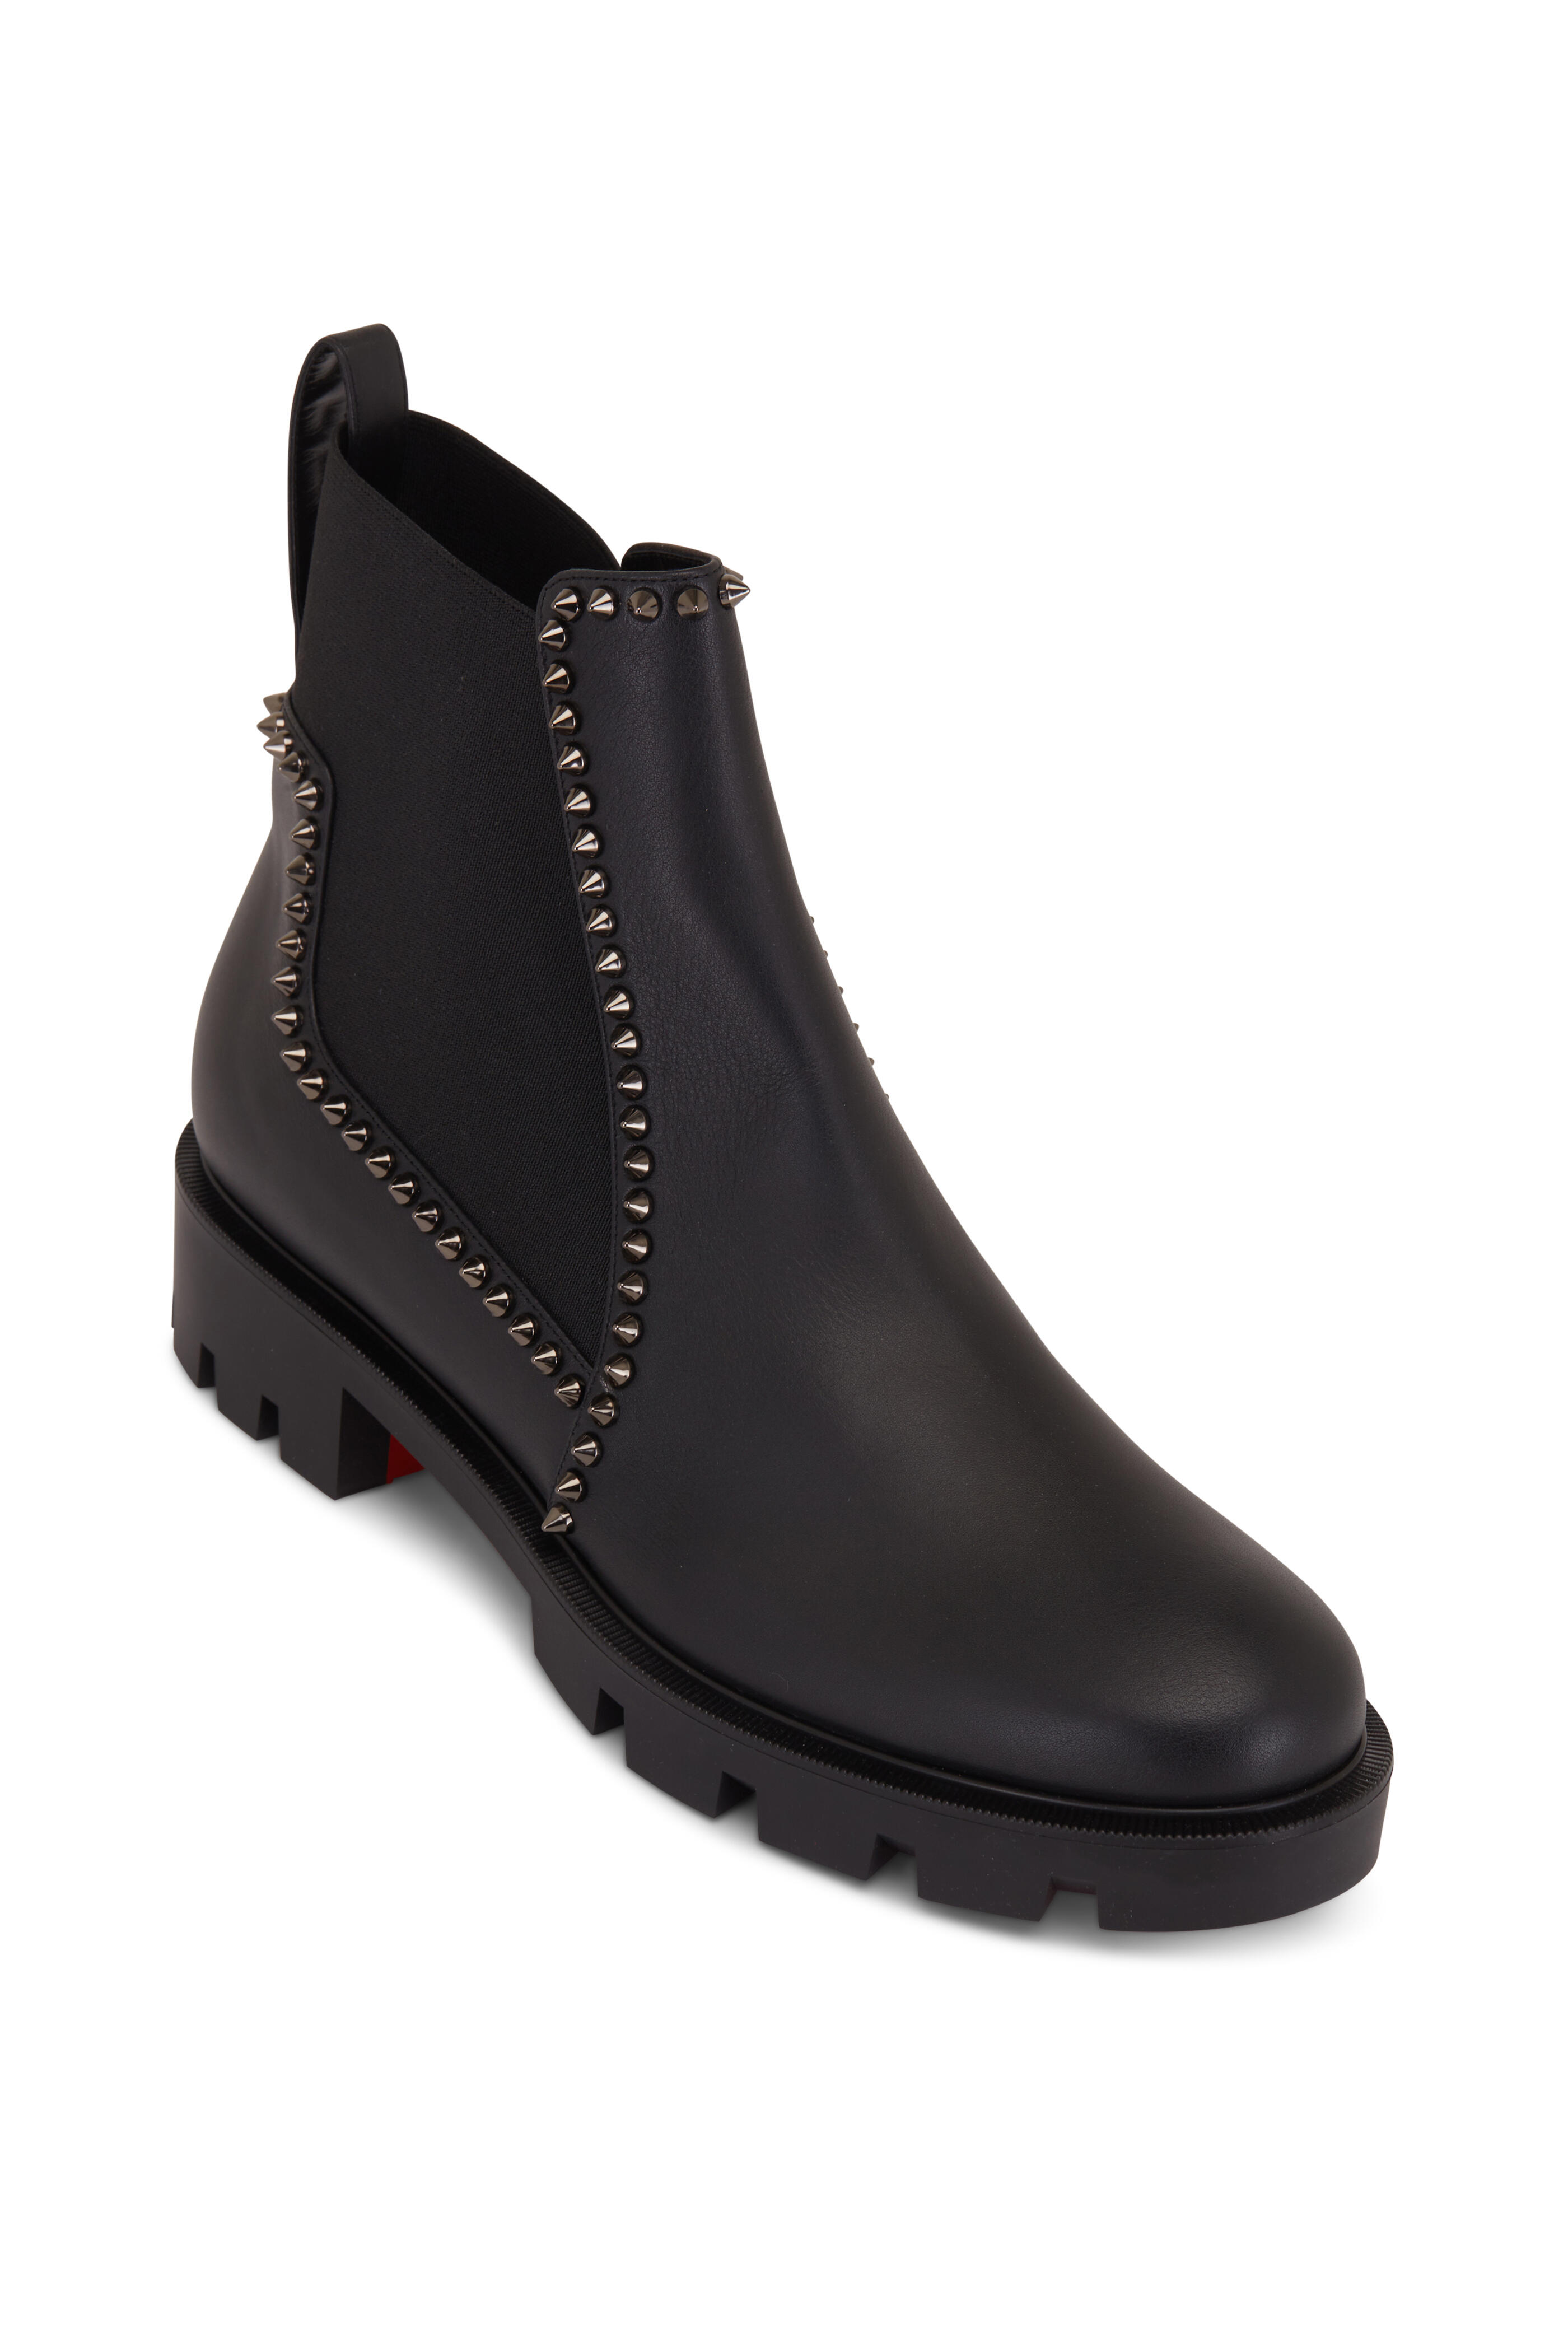 Christian Louboutin Out Line Spike Chelsea Boot Black